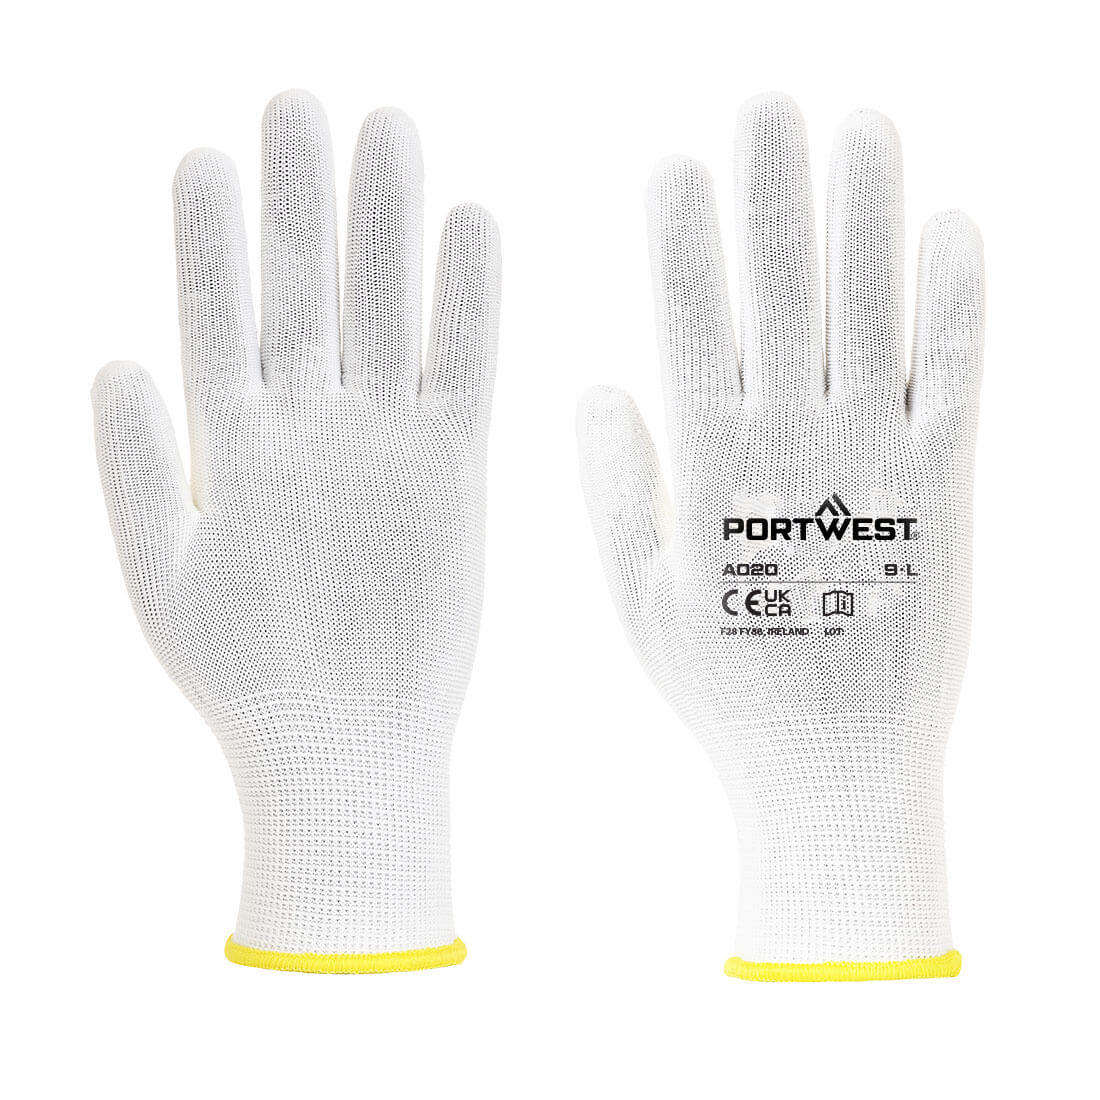 Portwest A020 Assembly Glove (960 Pairs) for General Handling